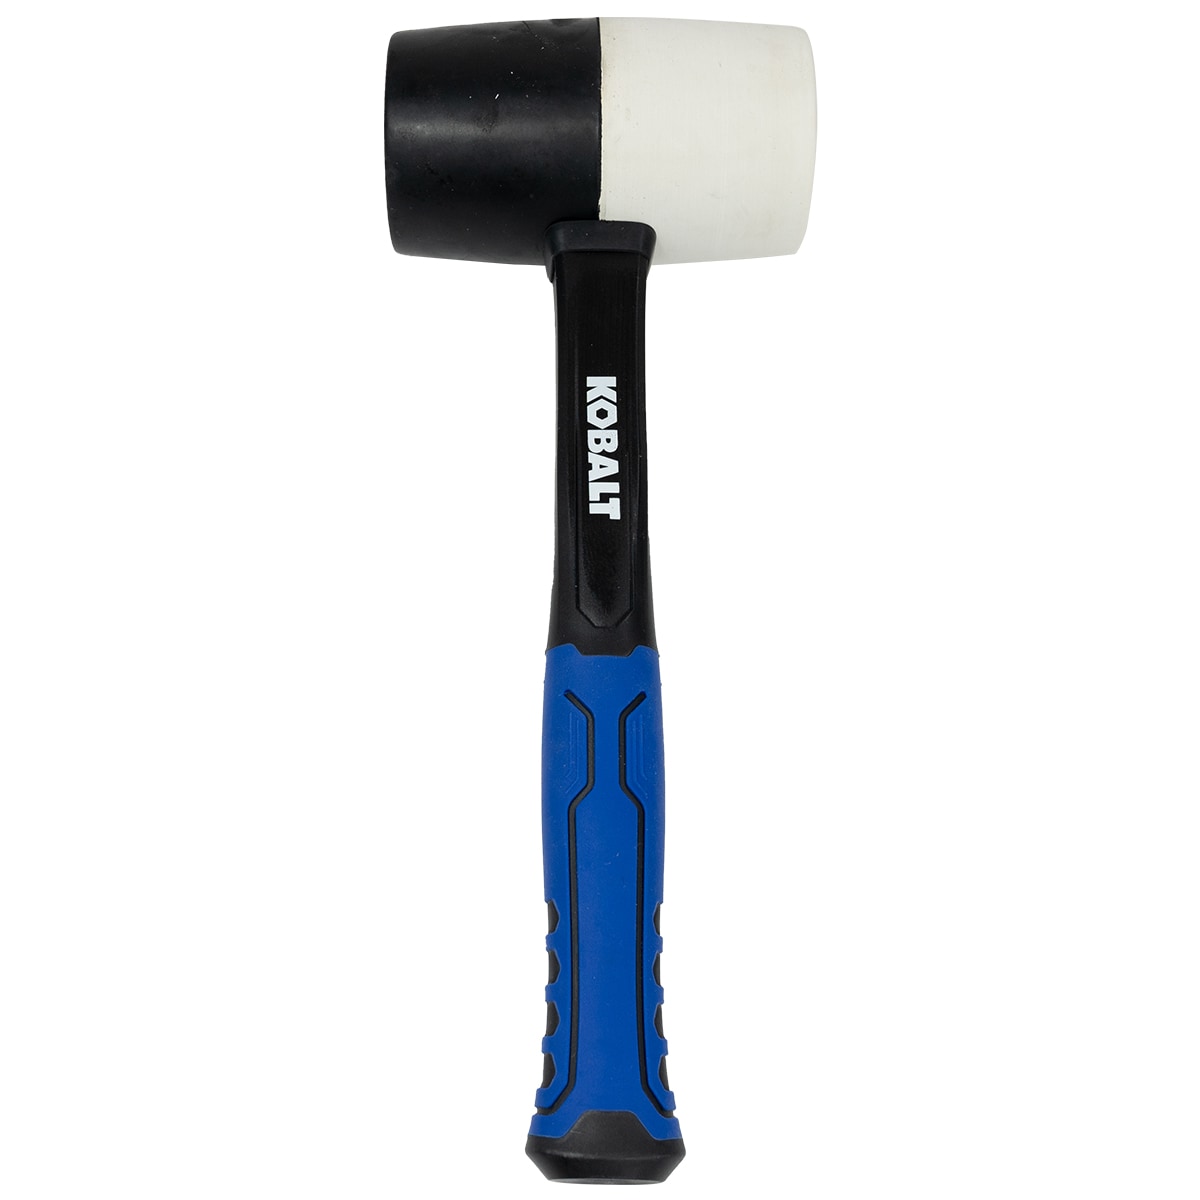 ABN Rubber Mallet 32 Ounce with Fiberglass Handle 